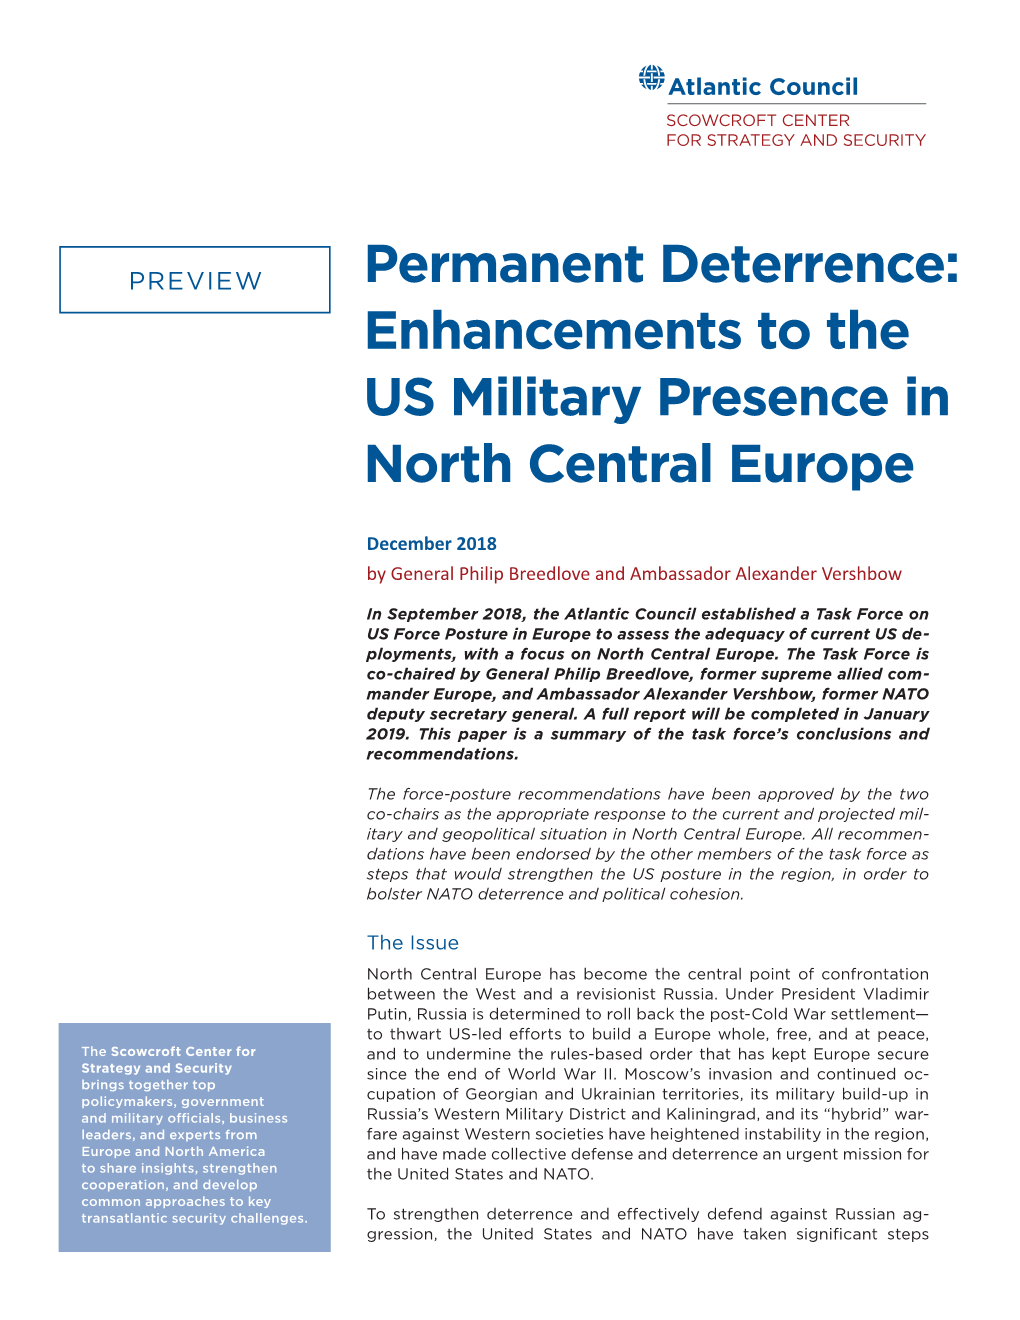 Permanent Deterrence: Enhancements to the US Military Presence in North Central Europe